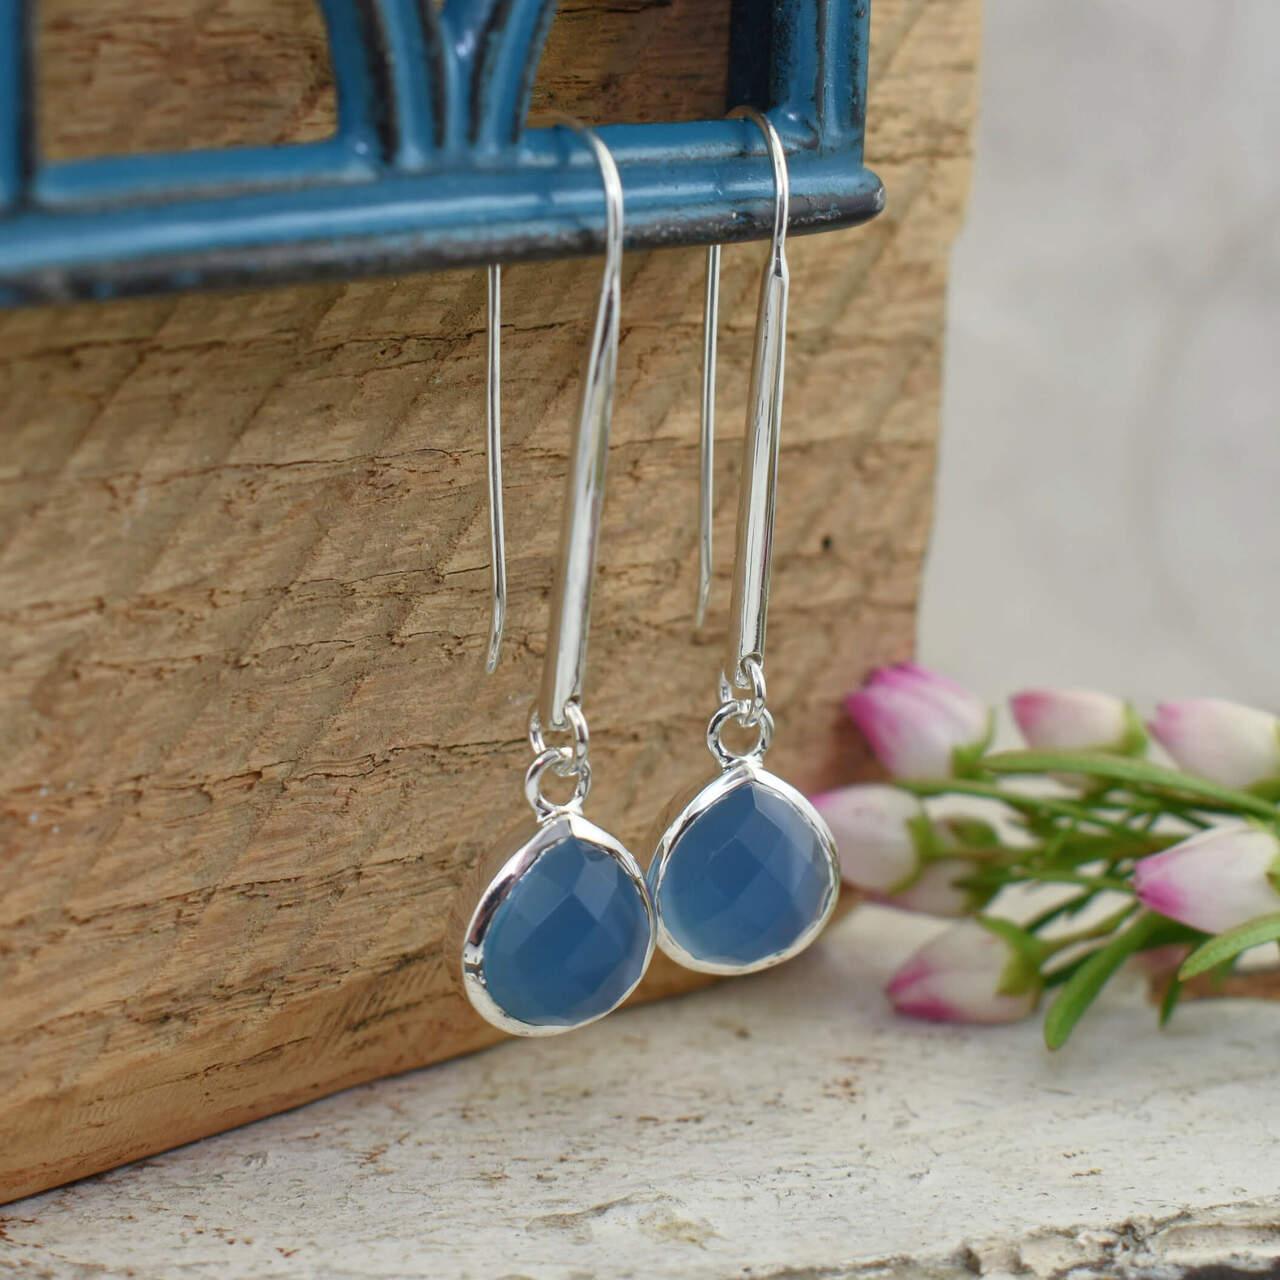 Elongated hook earrings in handcrafted sterling silver and chalcedony